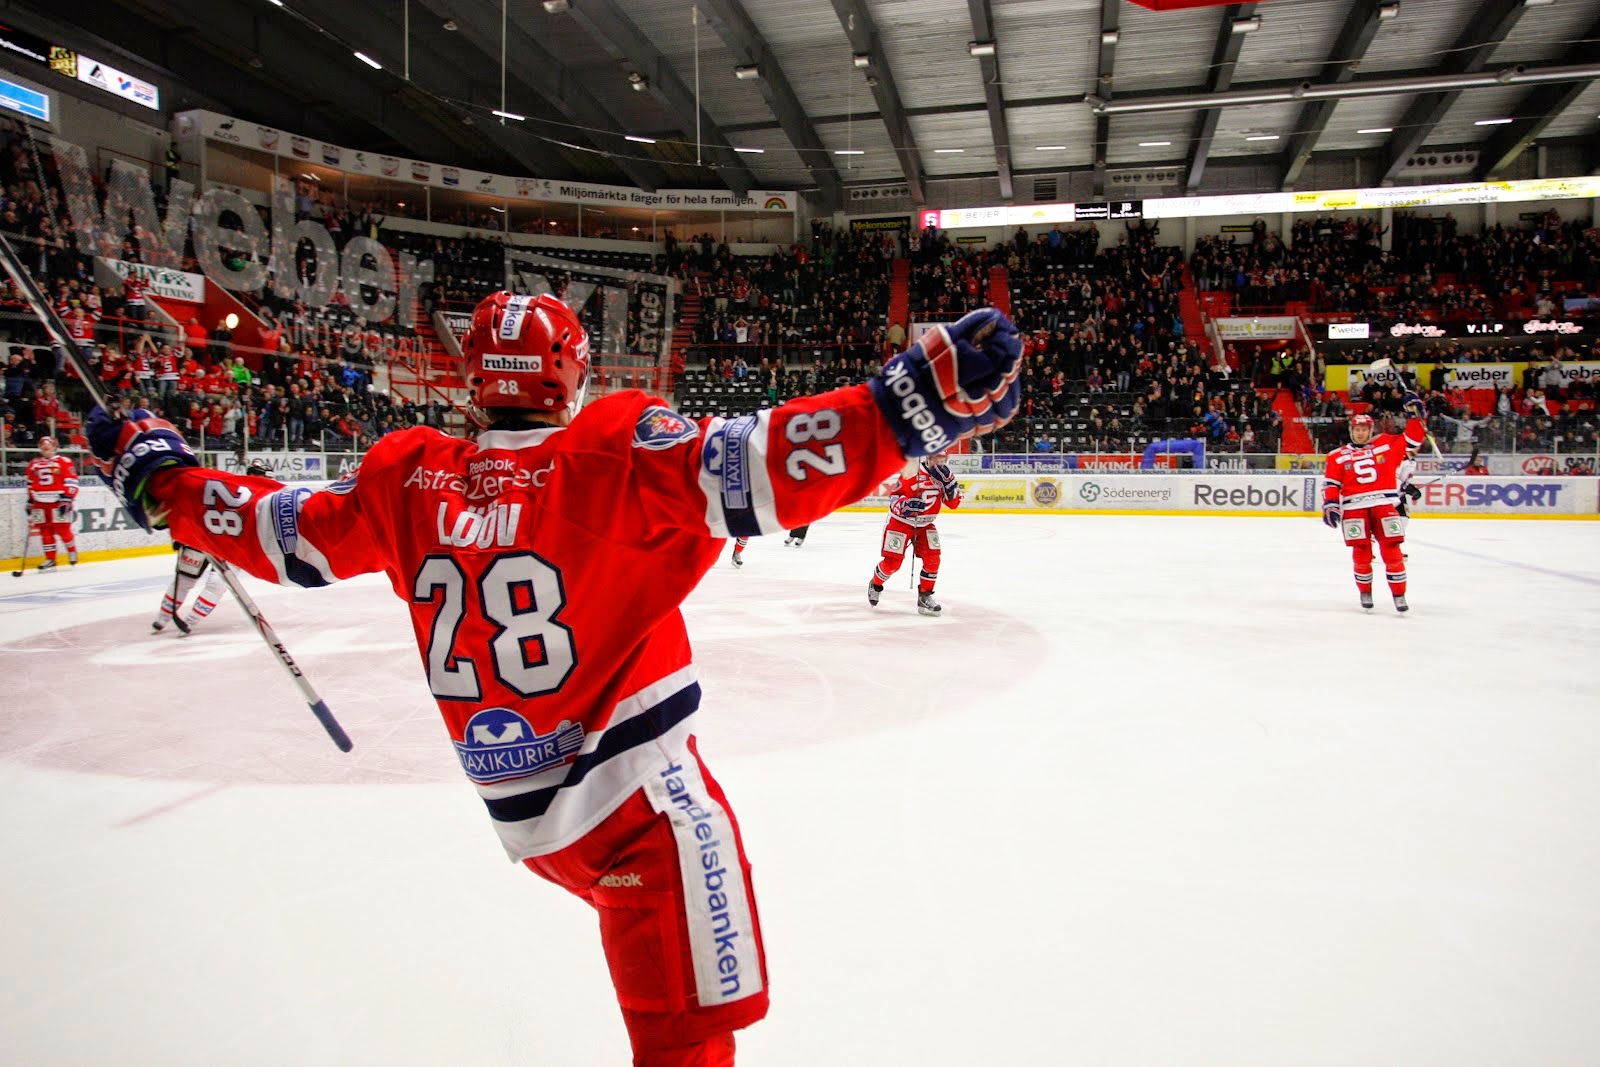 What were some AHL score highlights from the 2014-2015 season?